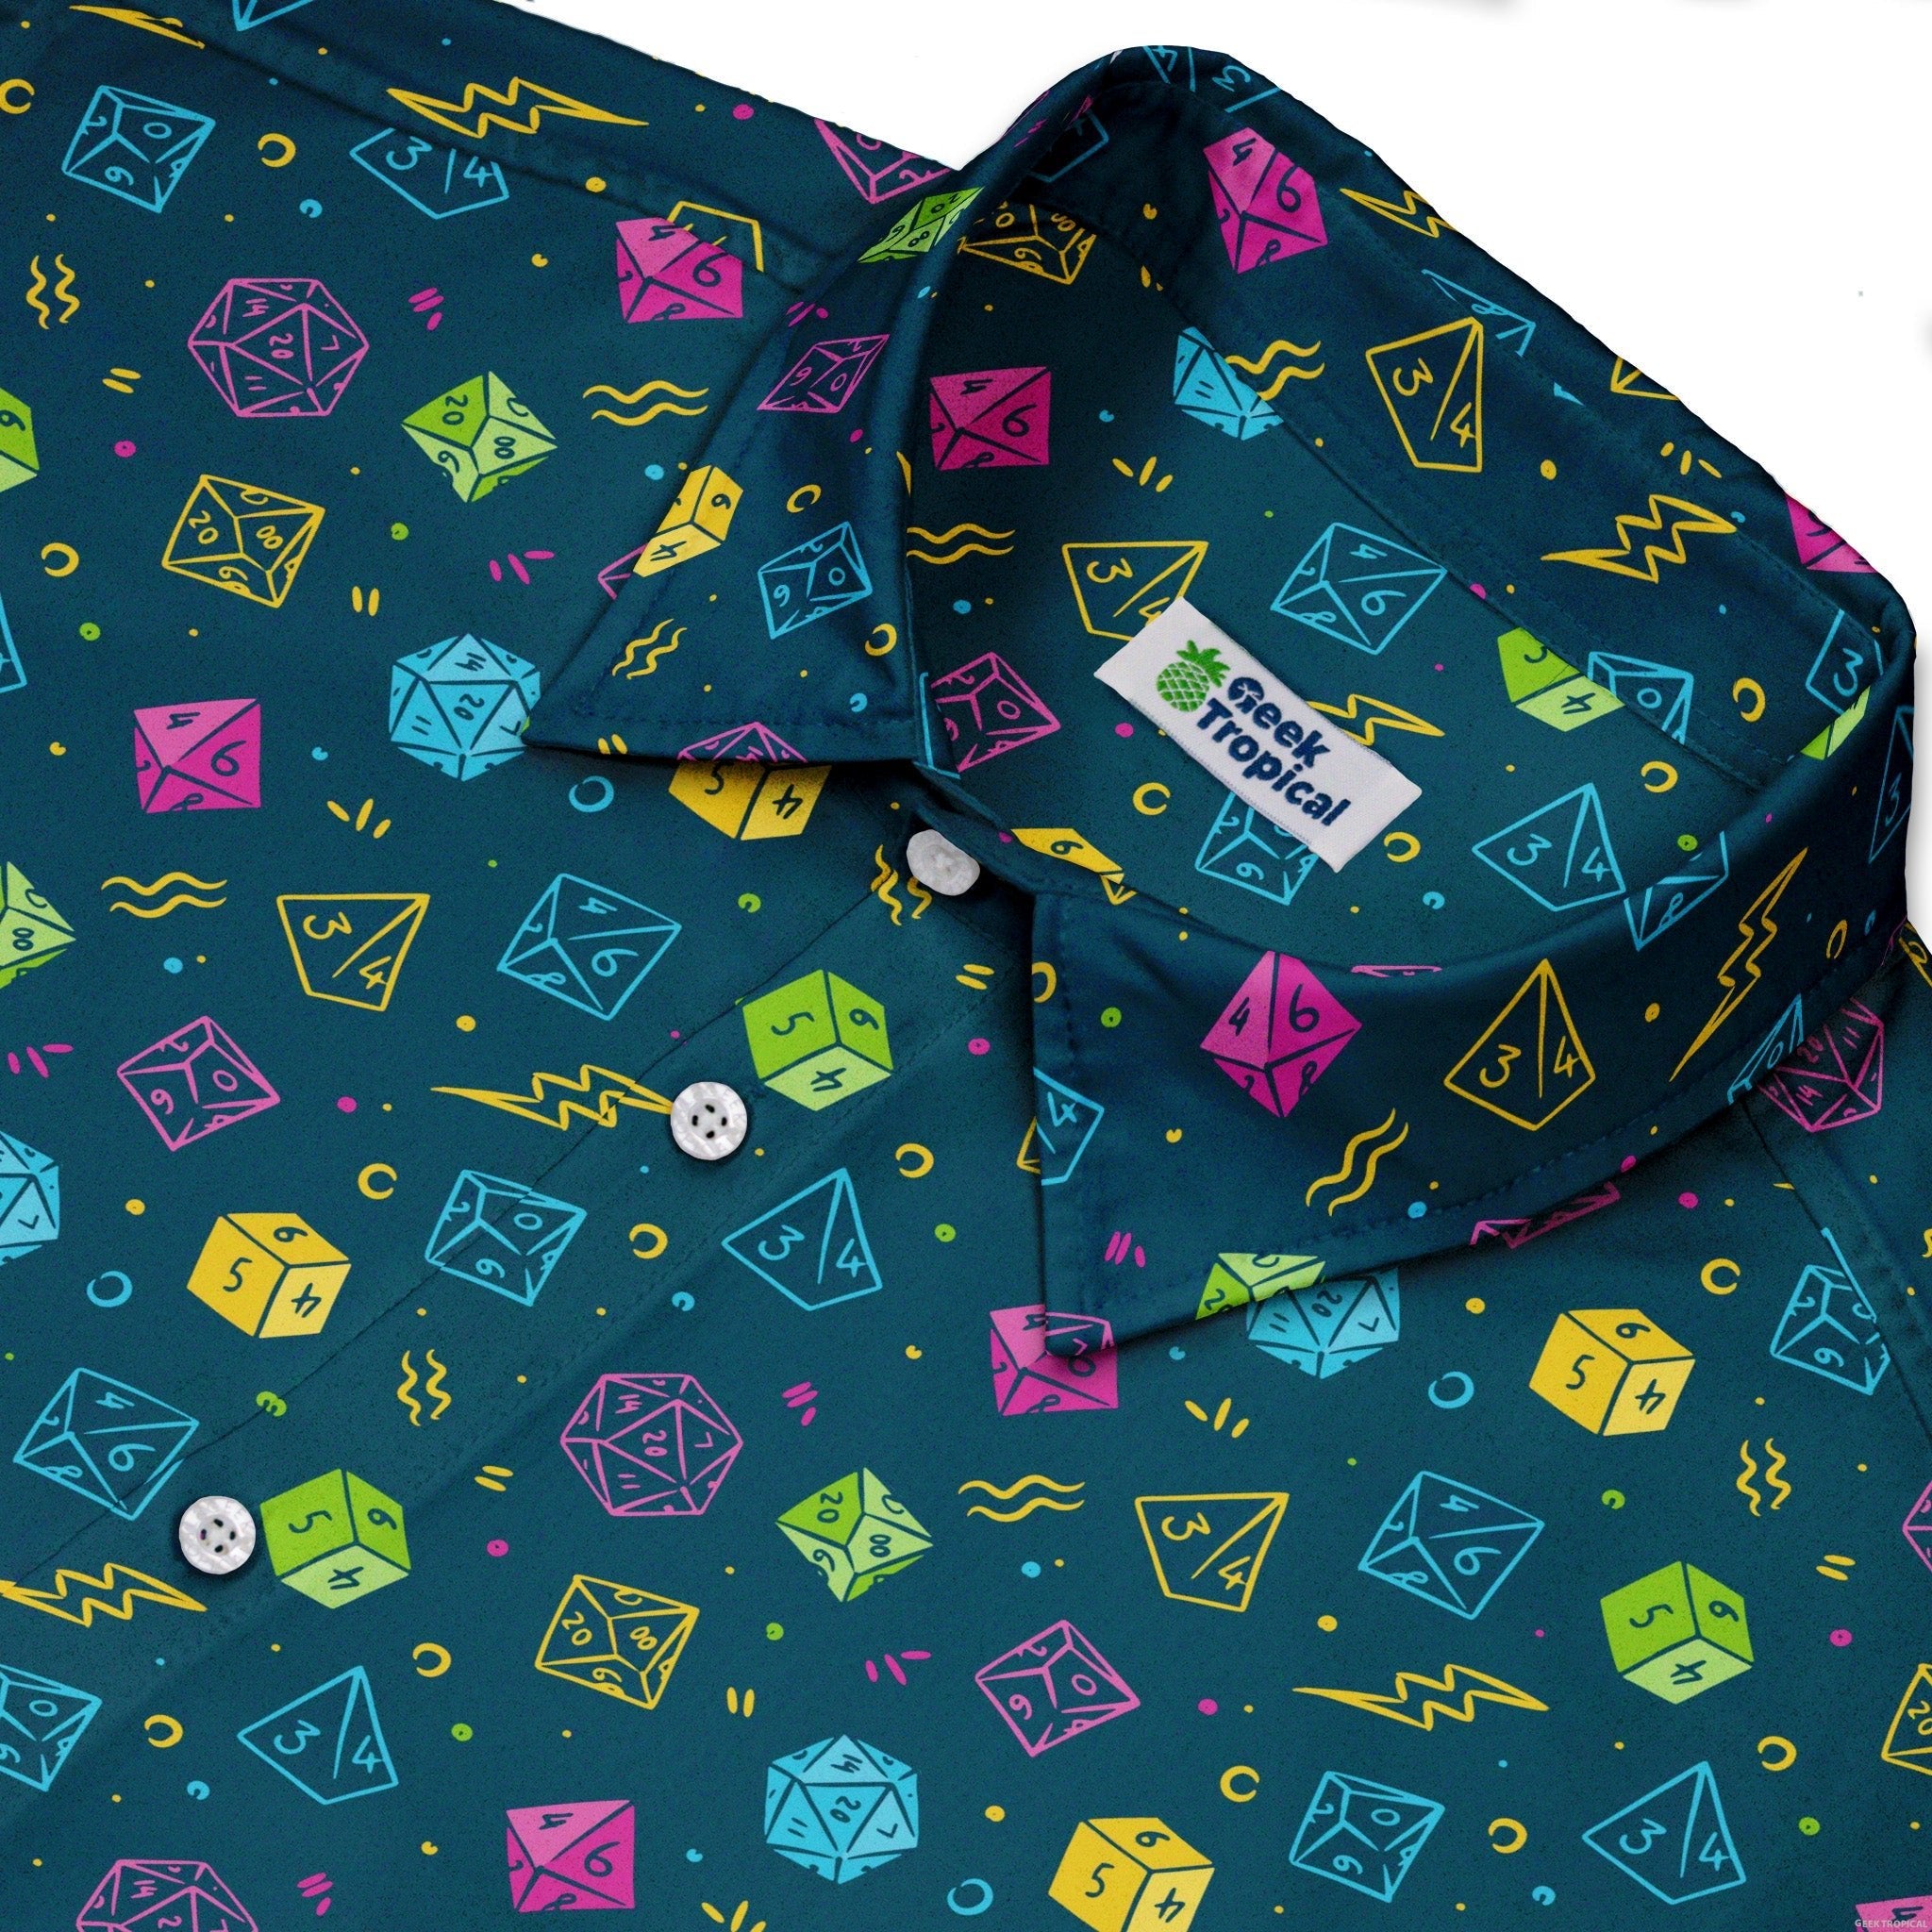 Dnd RPG Dice Blue Button Up Shirt - adult sizing - dnd & rpg print - Maximalist Patterns